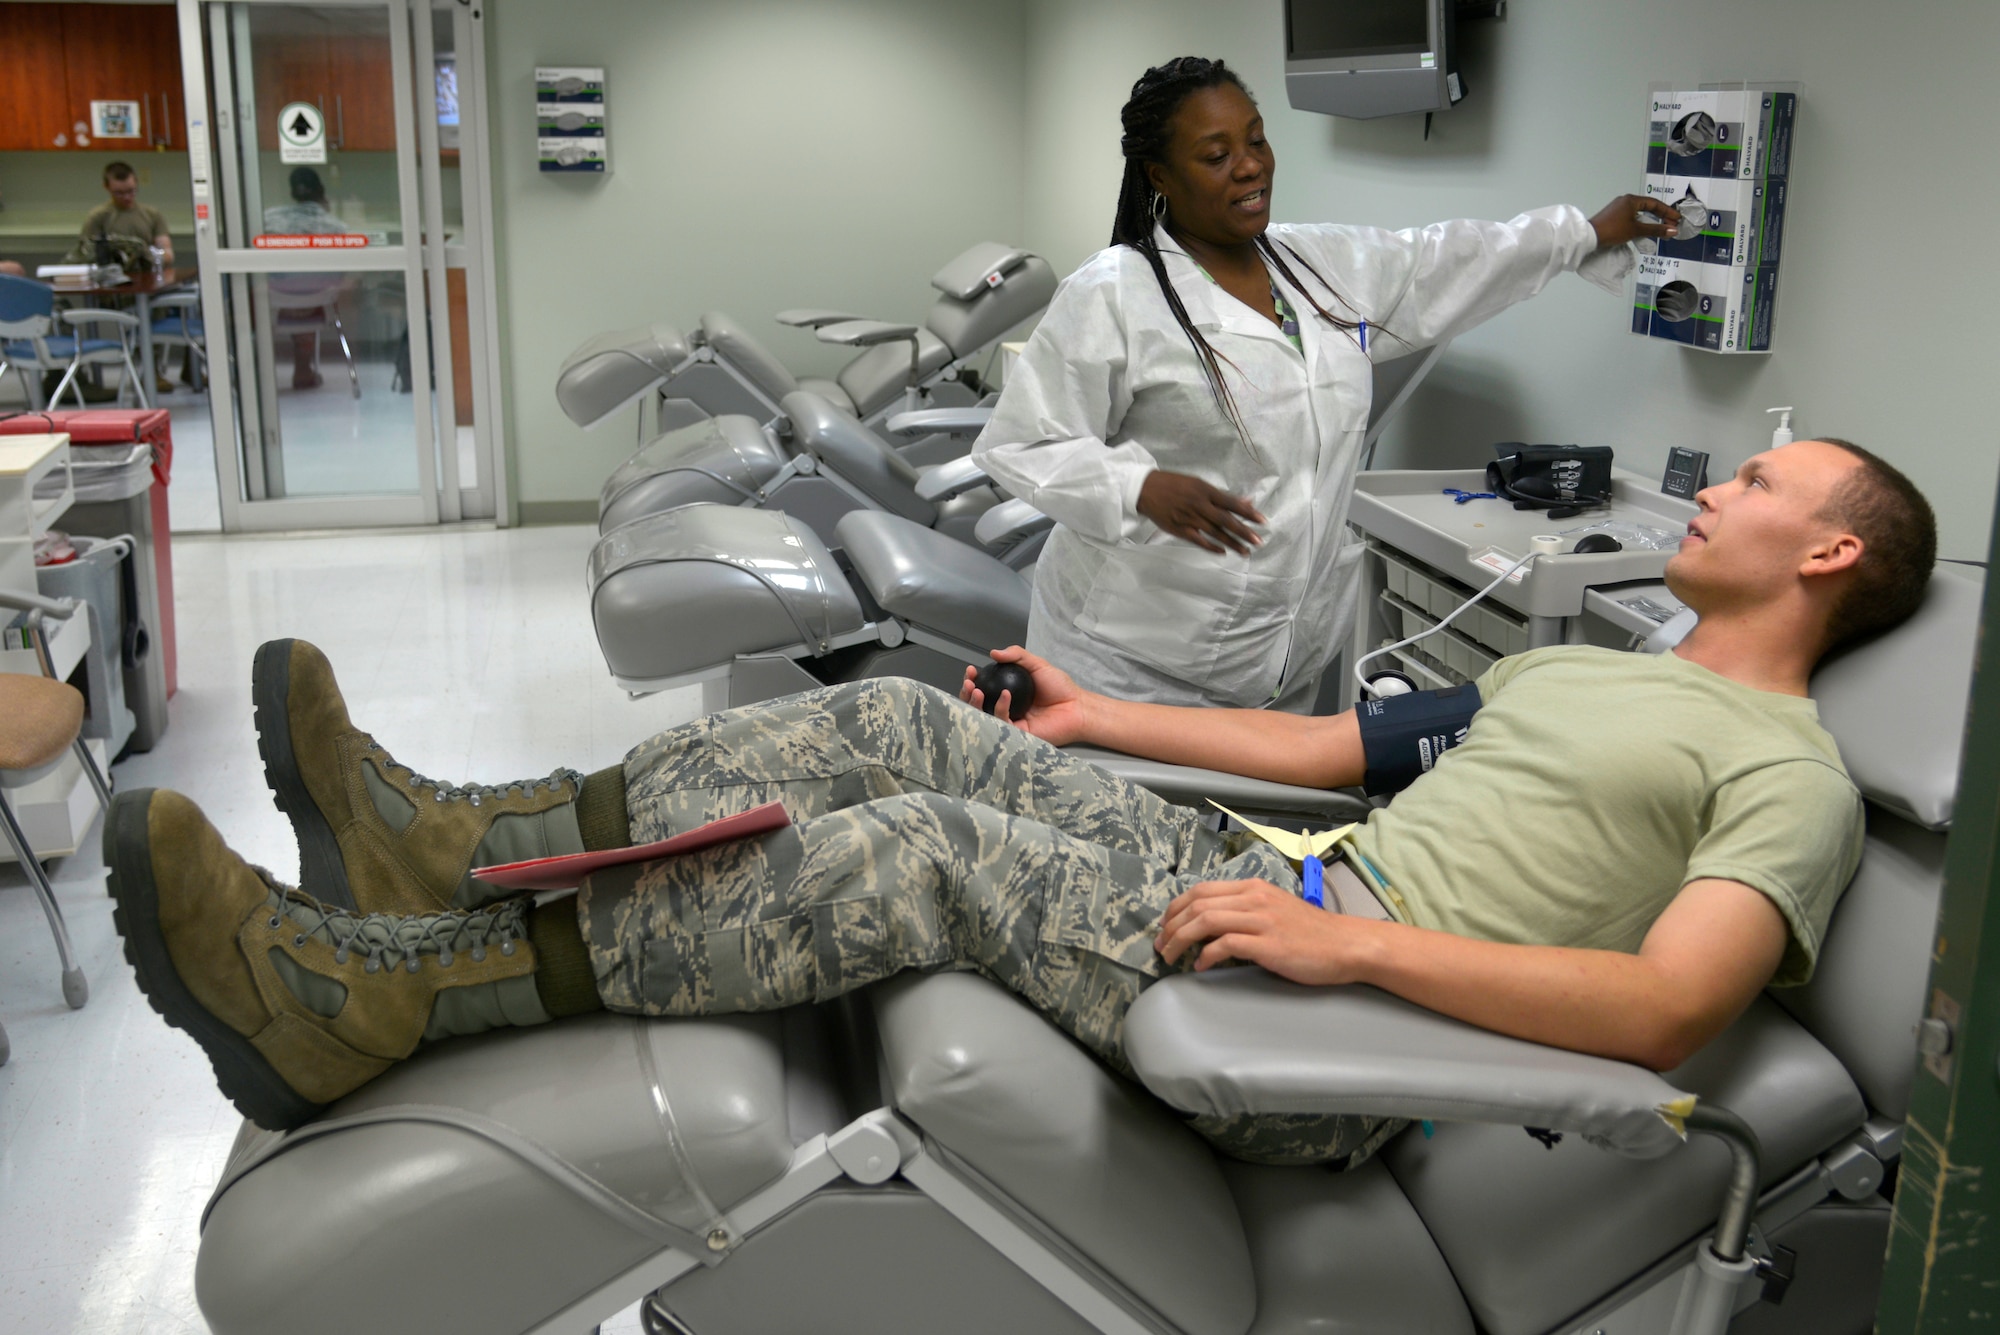 Tarissa Brown, 81st Diagnostics and Therapeutics Squadron lab technician, draws blood from U.S. Air Force Airman Igor Houston, 336th Training Squadron student, at the Blood Donor Center at Keesler Air Force Base, Mississippi, July 16, 2019. The Keesler Blood Donor Center provides blood to deployed service members. (U.S. Air Force photo by Airman Seth Haddix)